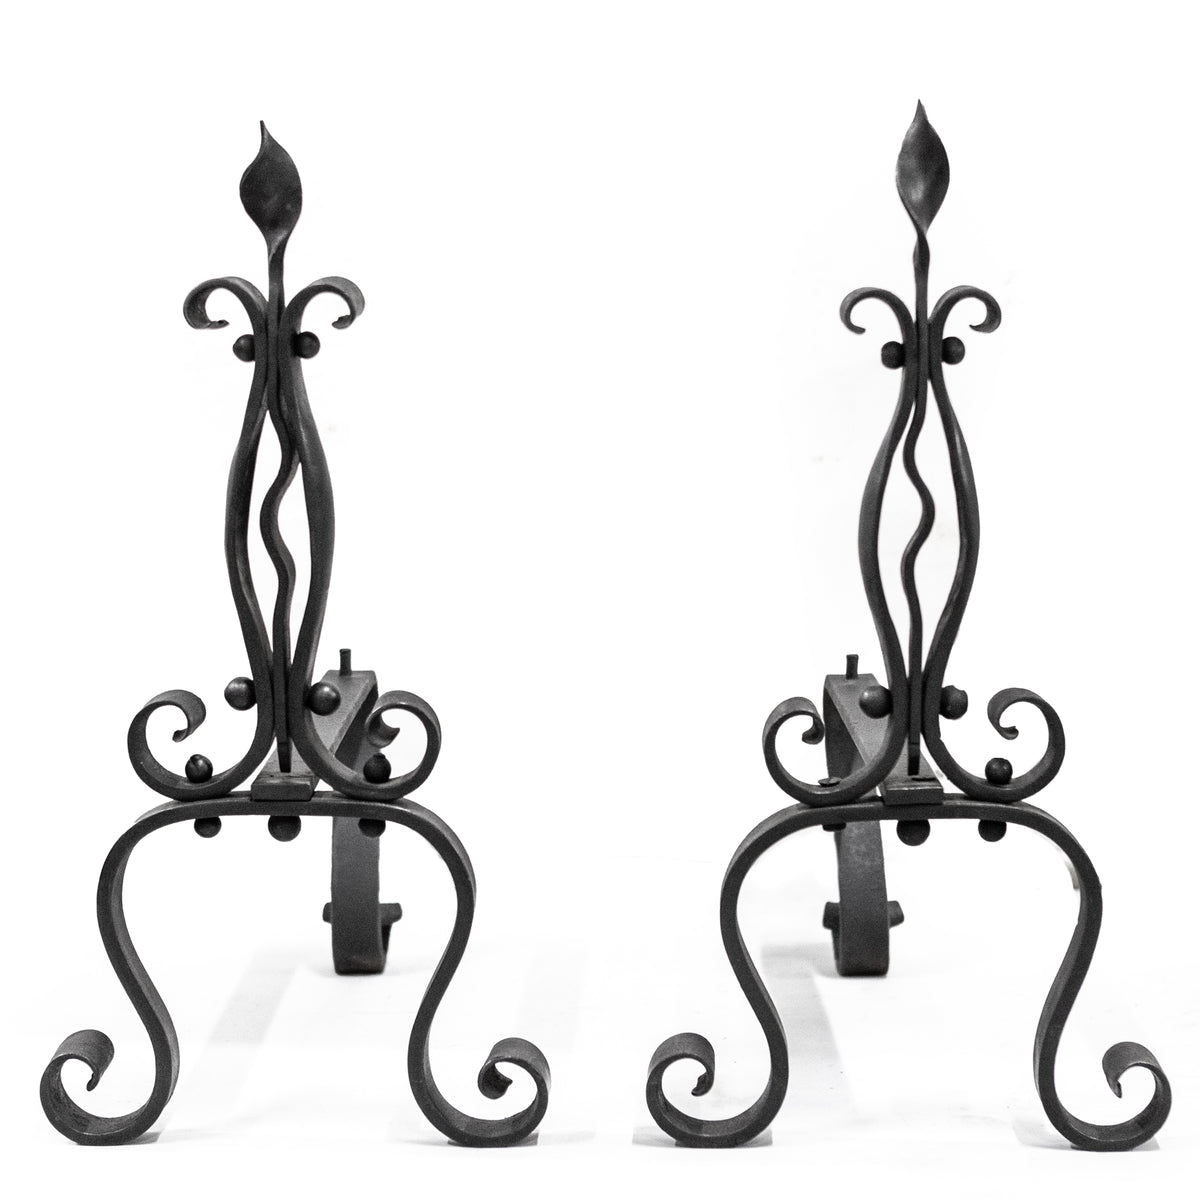 Ornate Antique Wrought Iron Firedogs | The Architectural Forum